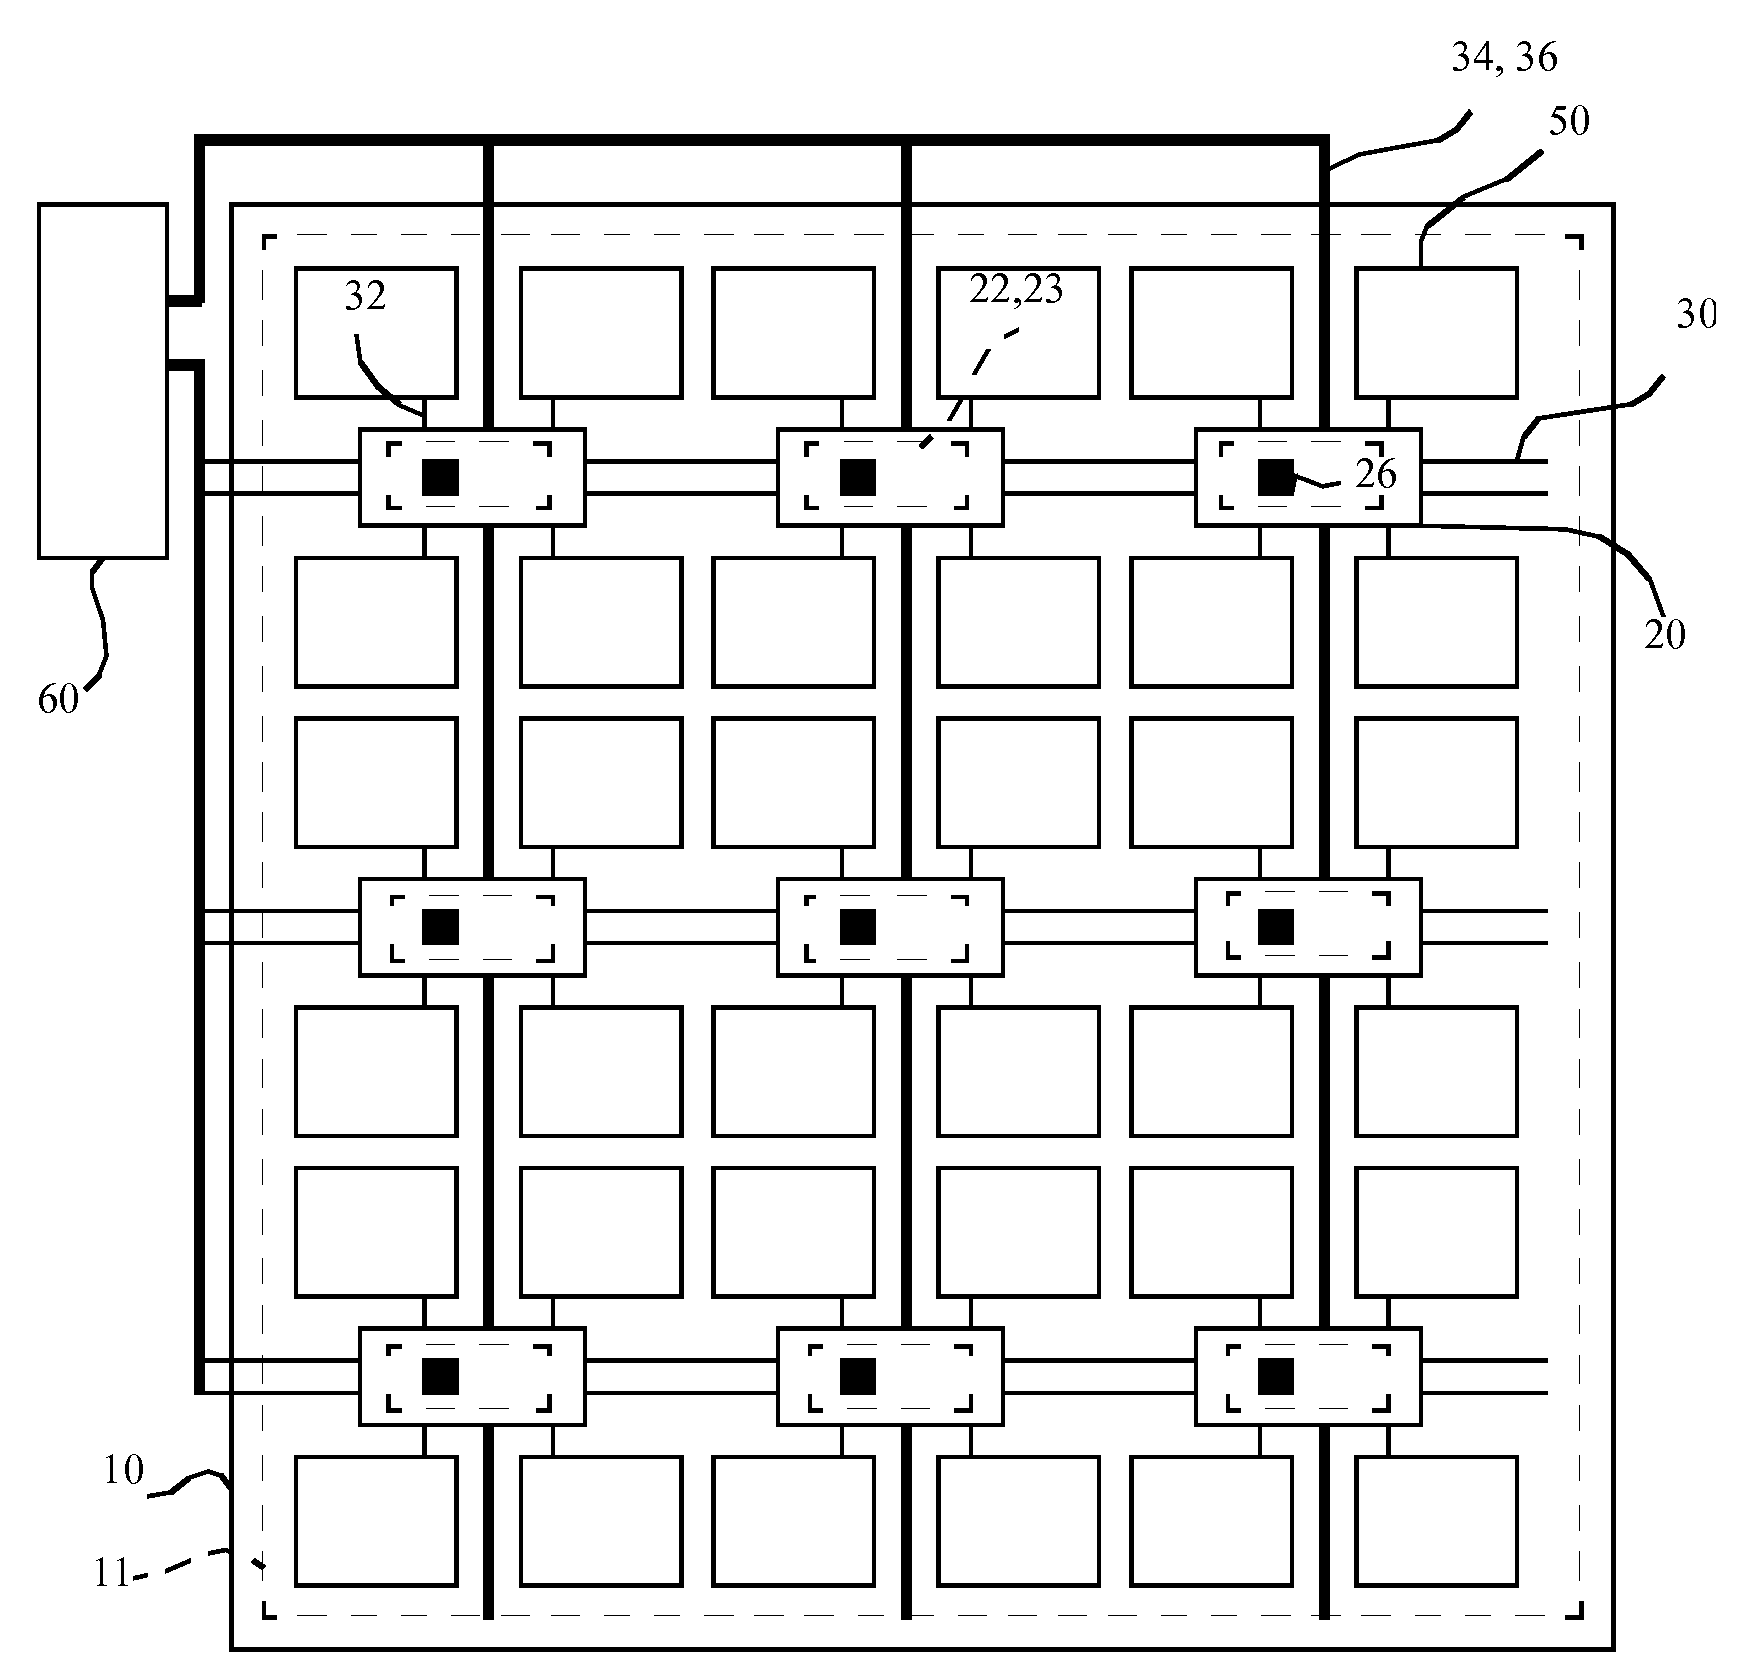 Optically testing chiplets in display device